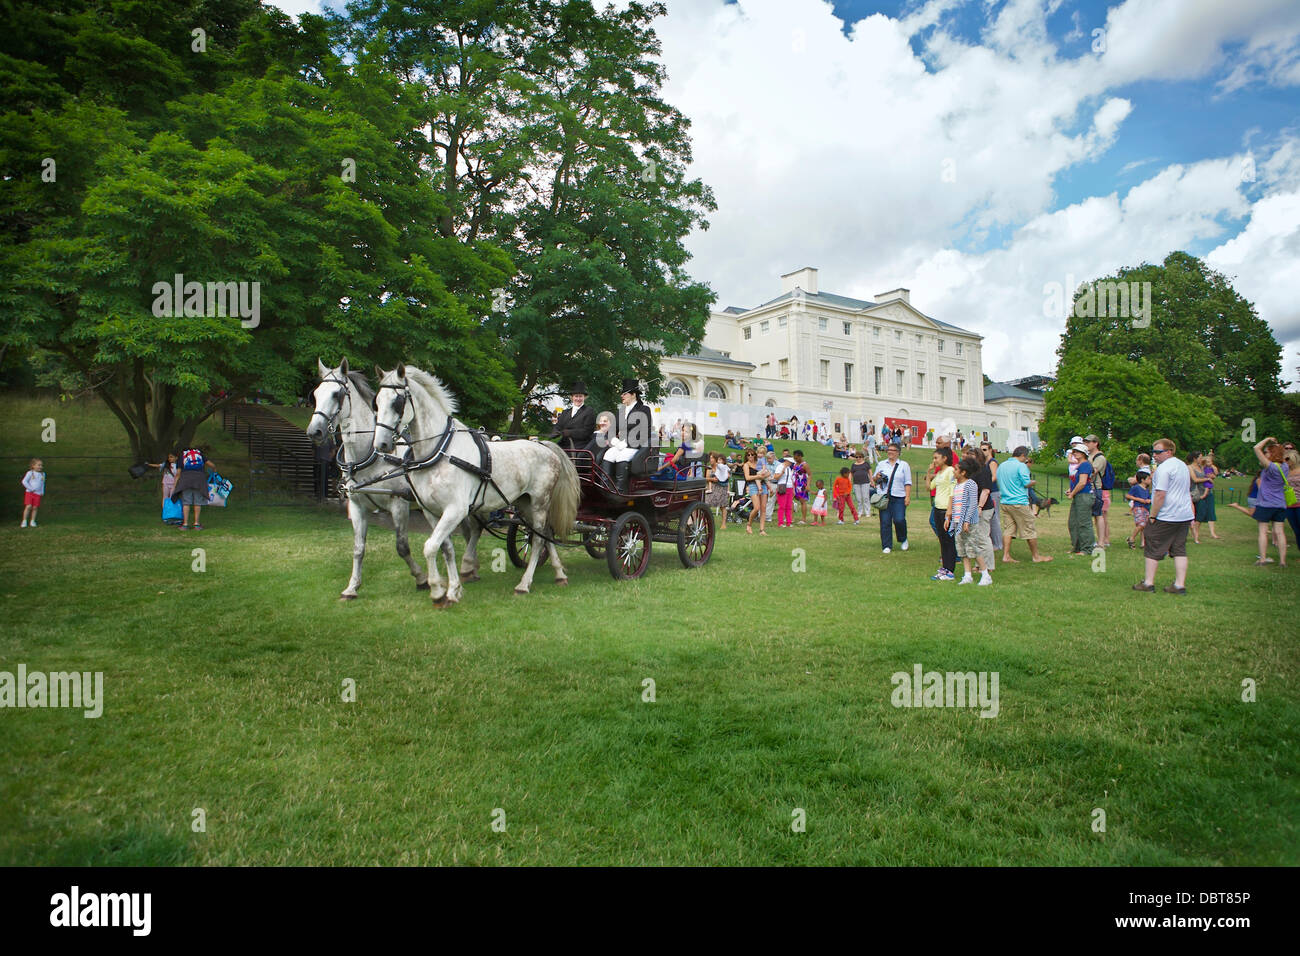 Kenwood Summer Fete, London, UK 3rd & 4th August 2013. Kenwood hosts a garden Fete to celebrate the Lord Iveagh's donation to the nation of Kenwood and his painting collection in 1927. Credit:  Tony Farrugia/Alamy Live News Stock Photo